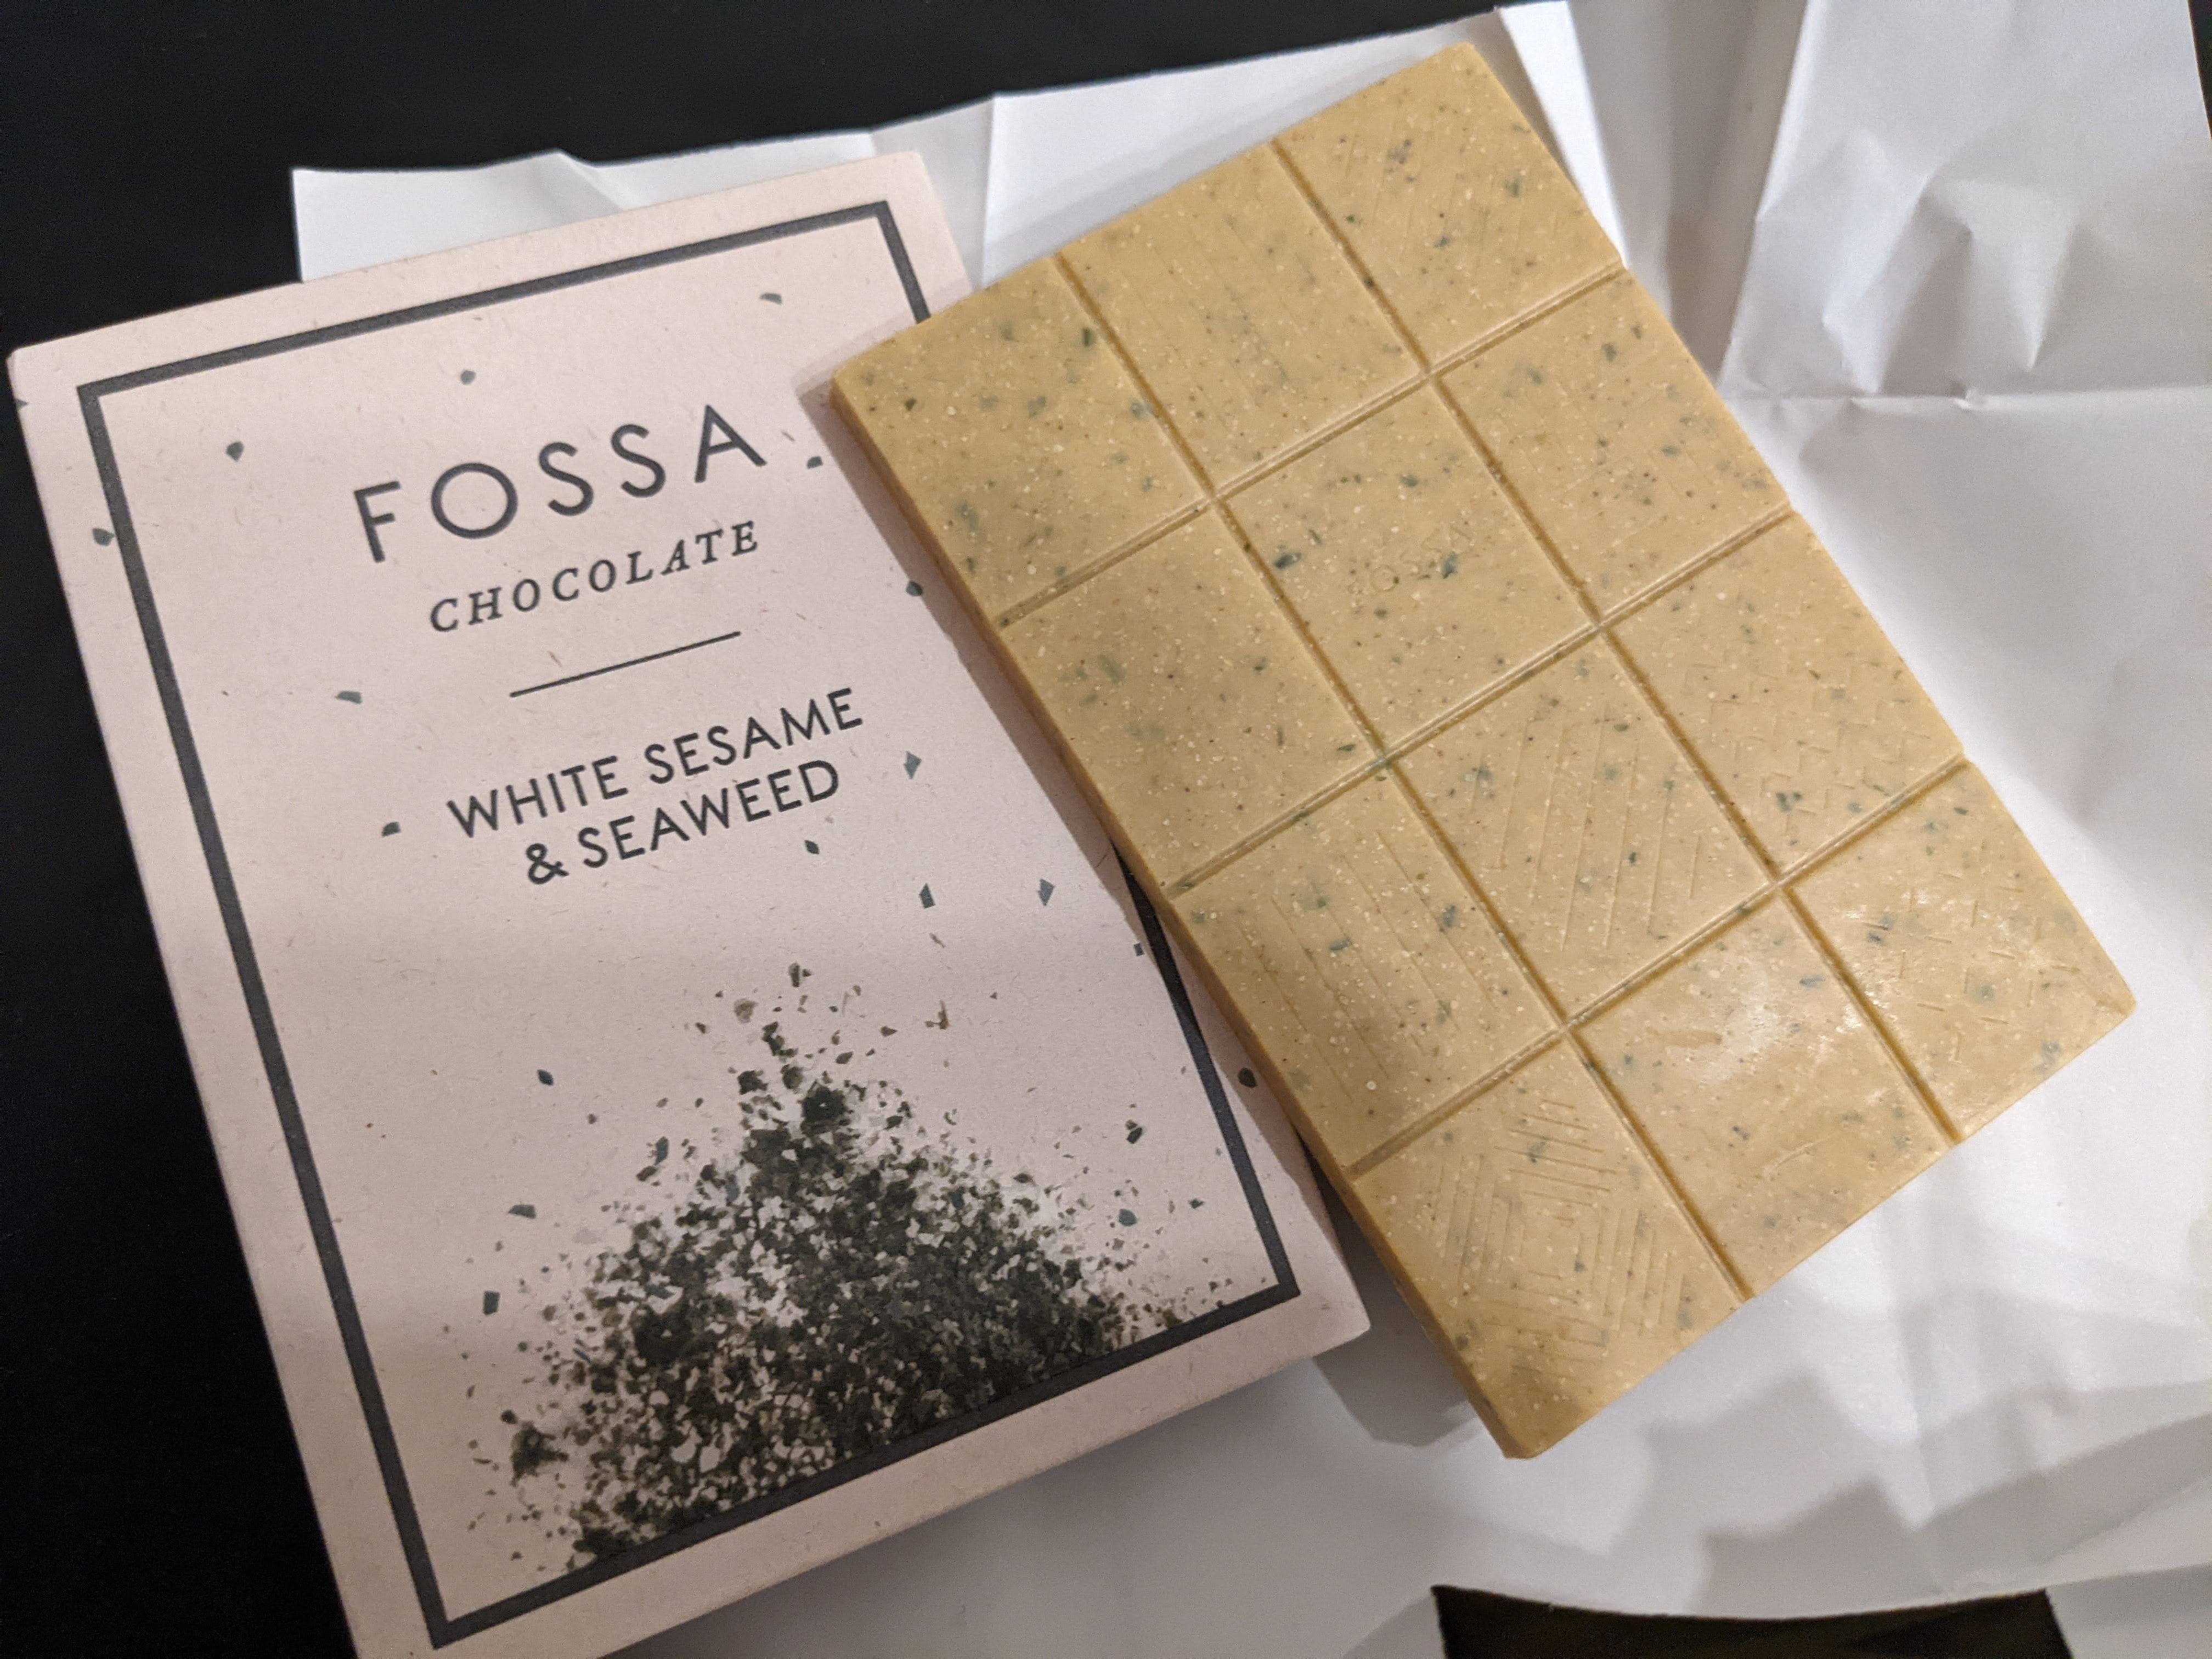 Bar of Fossa white sesame and seaweed chocolate next to packaging.